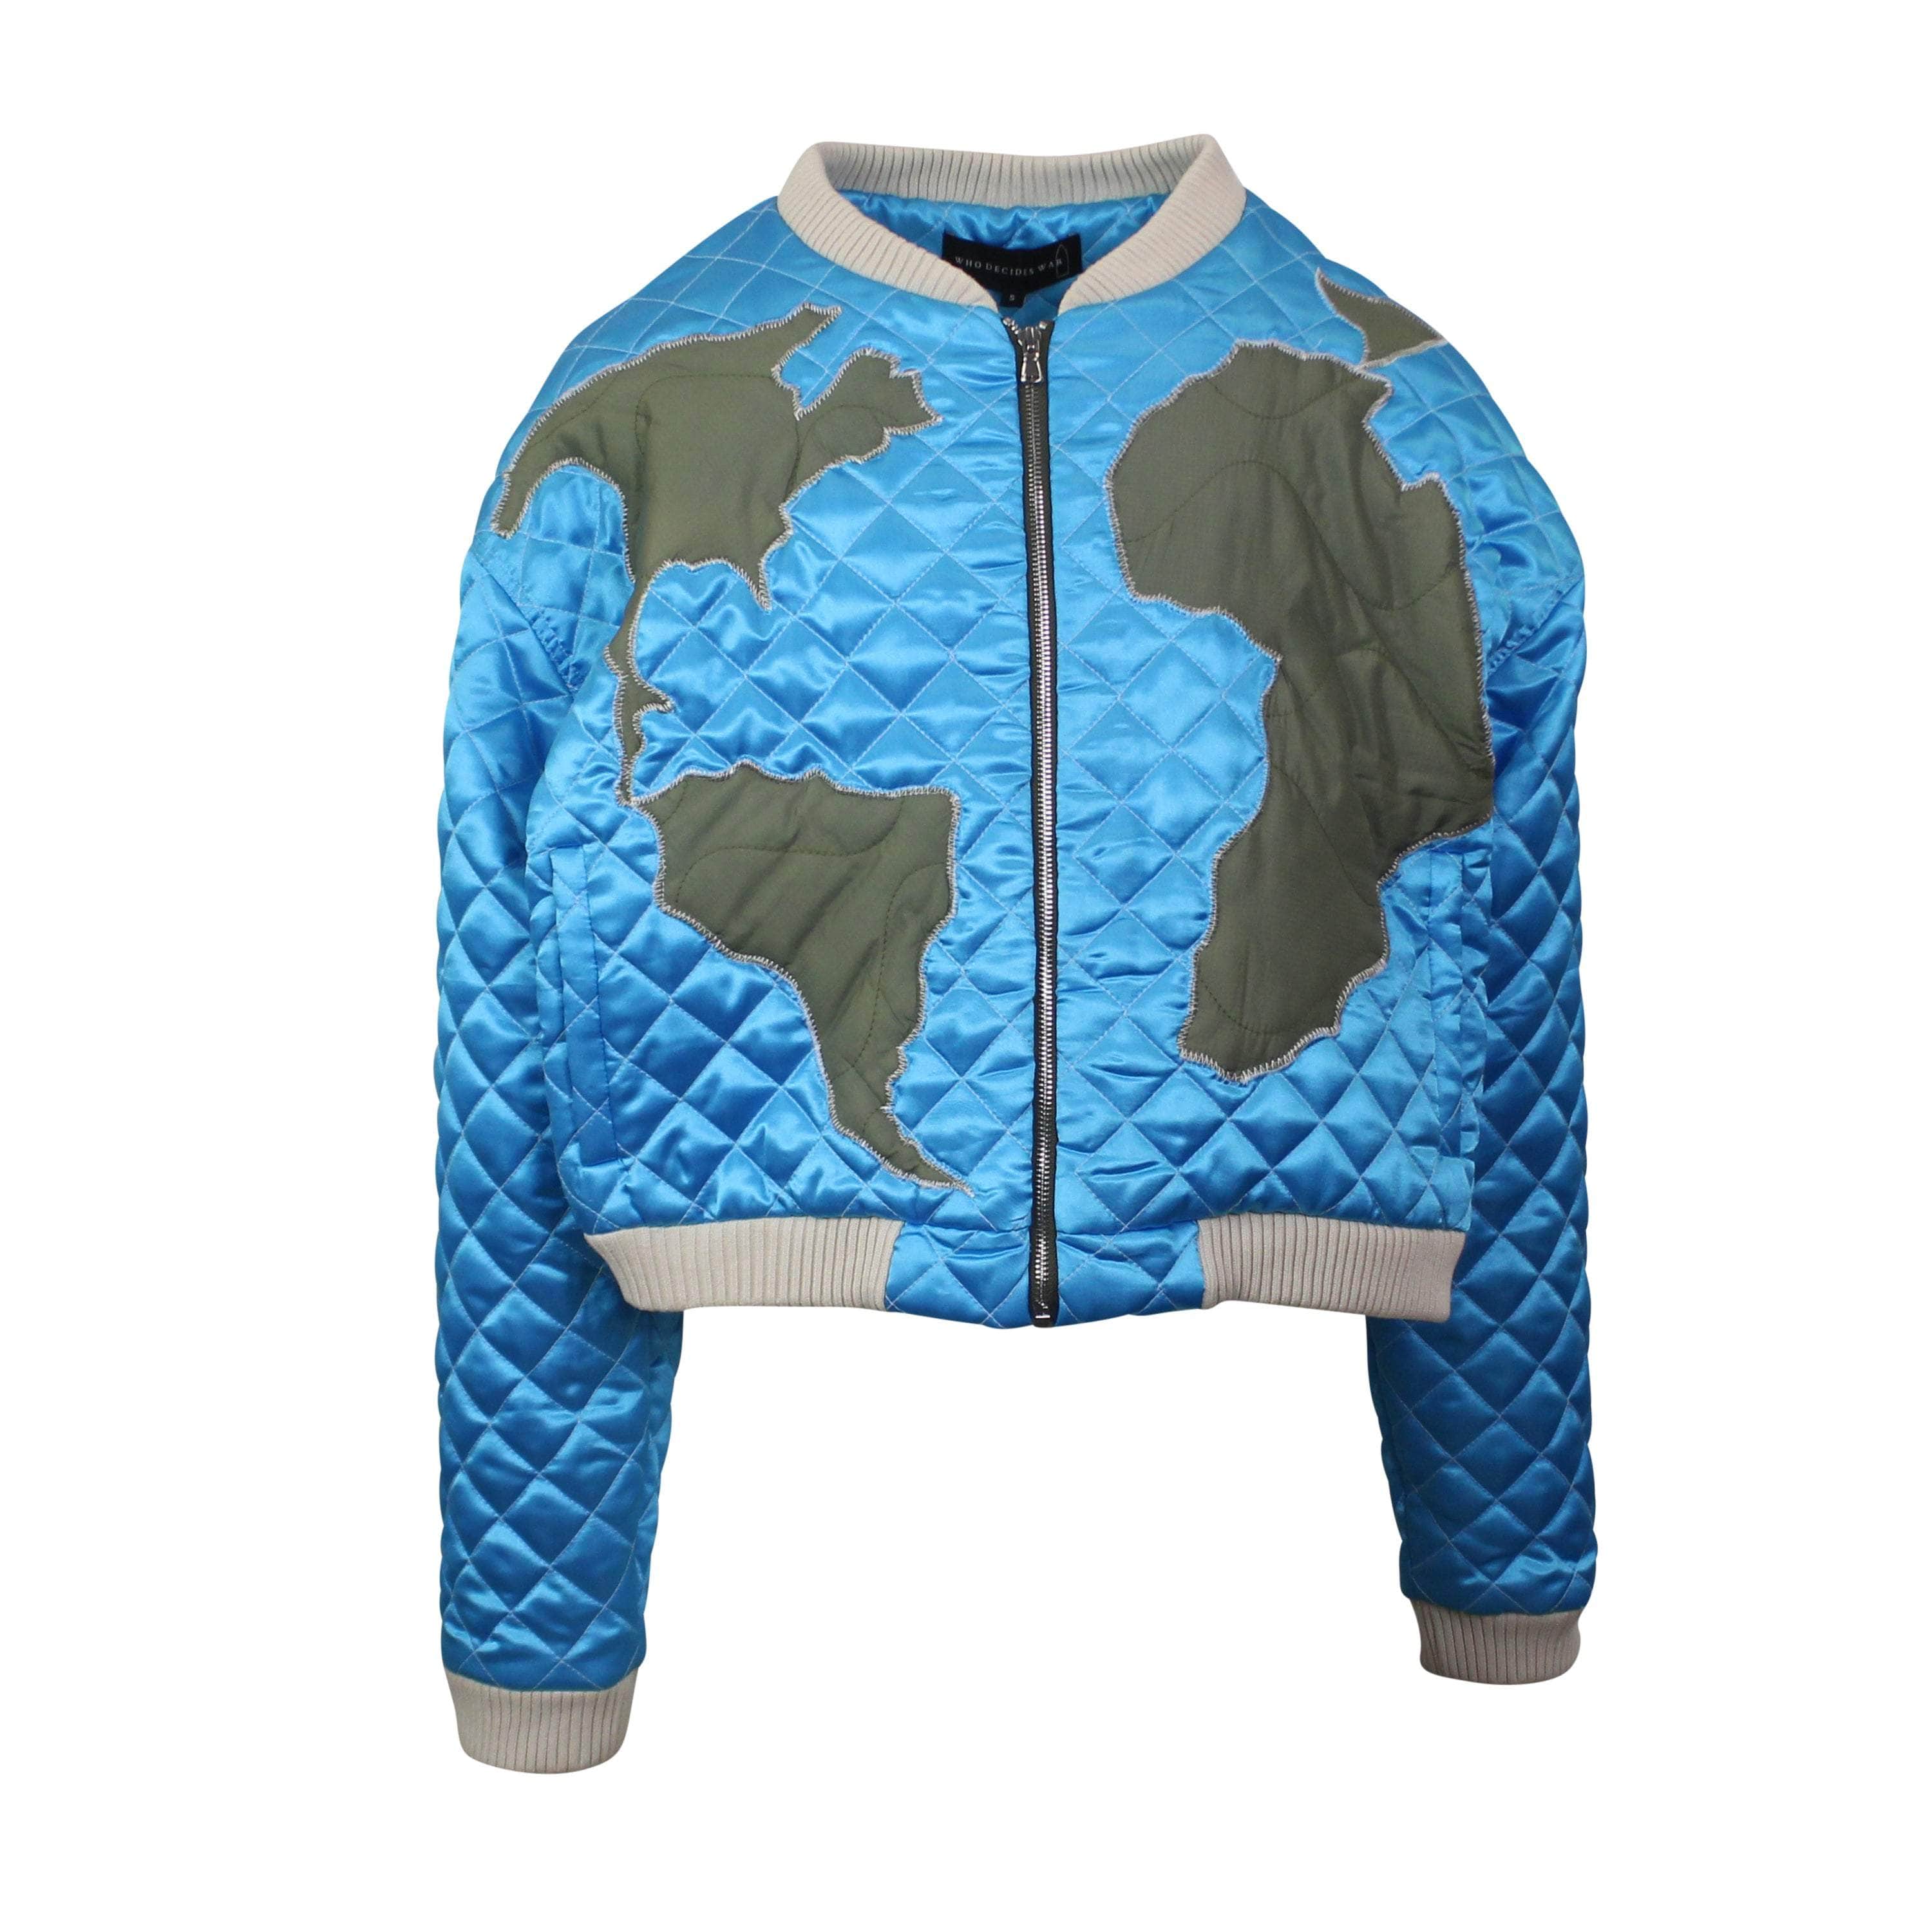 Who Decides War 750-1000, channelenable-all, chicmi, couponcollection, main-clothing, mens-bombers, shop375, who-decides-war Sky Blue Global Grid Bomber